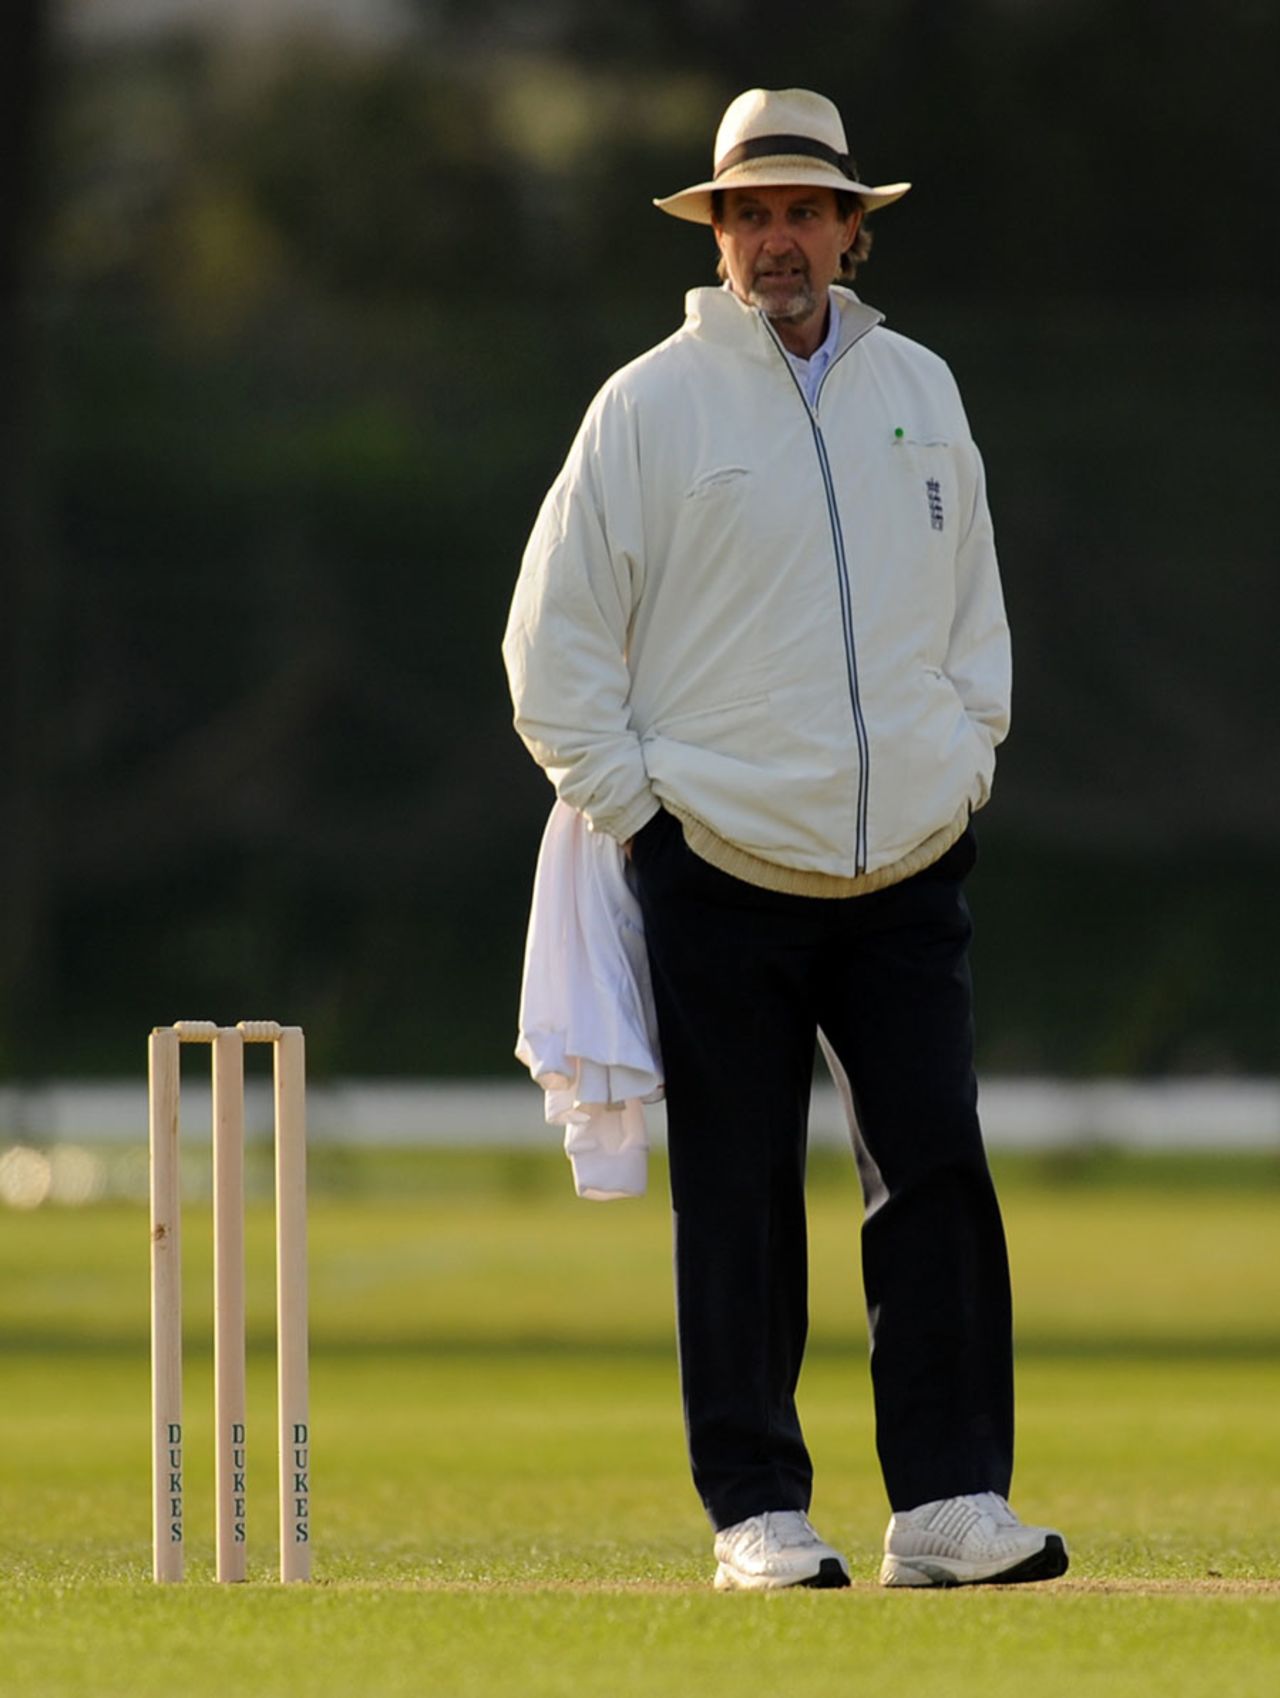 Peter Willey has been one of the longest-serving ECB umpires, 